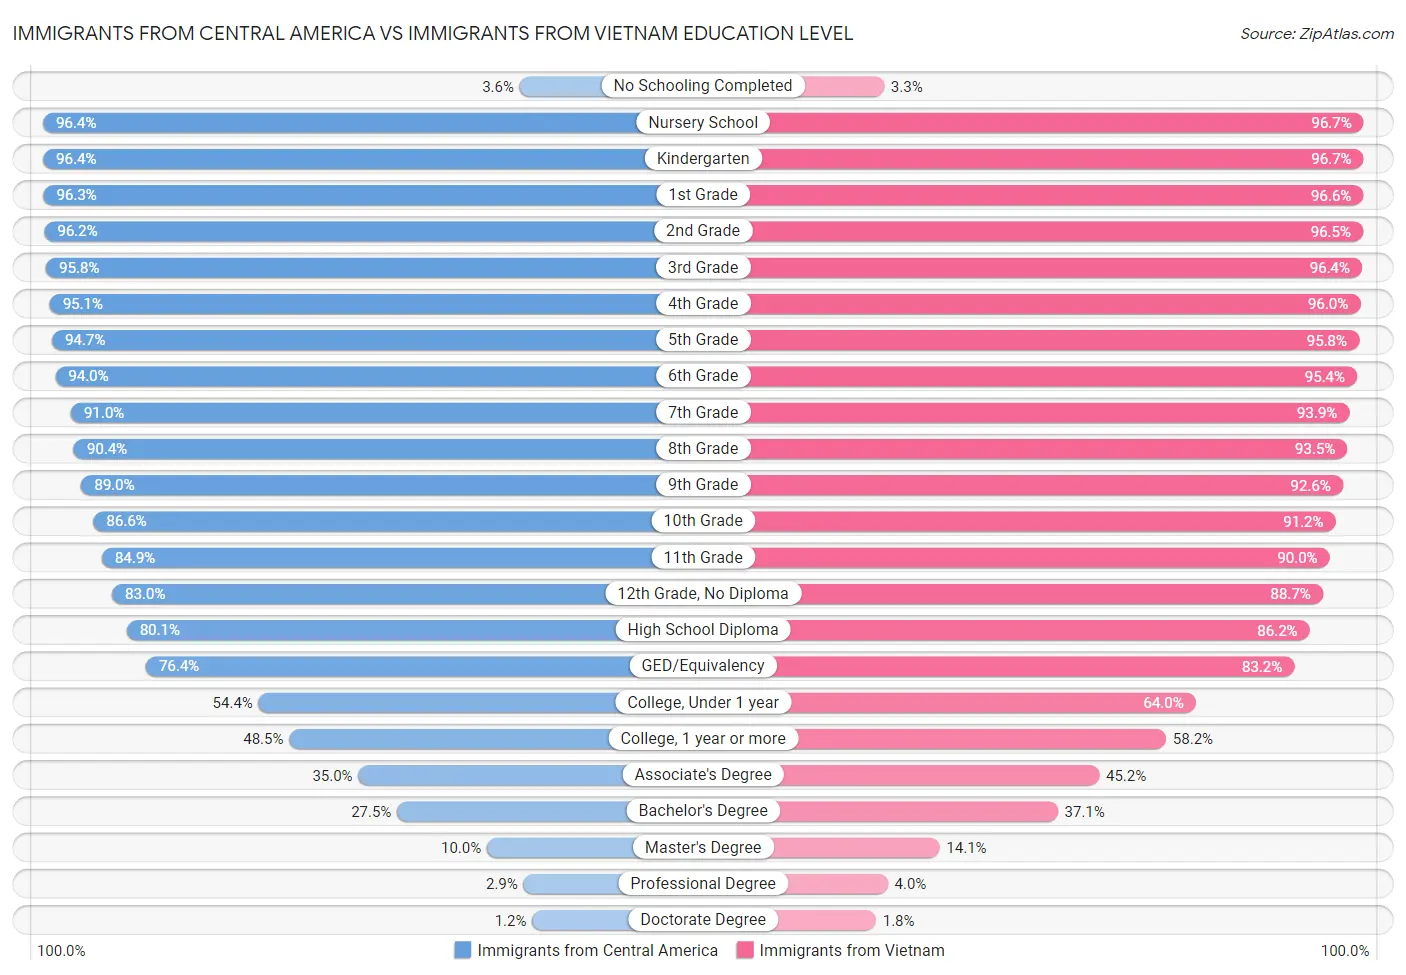 Immigrants from Central America vs Immigrants from Vietnam Education Level